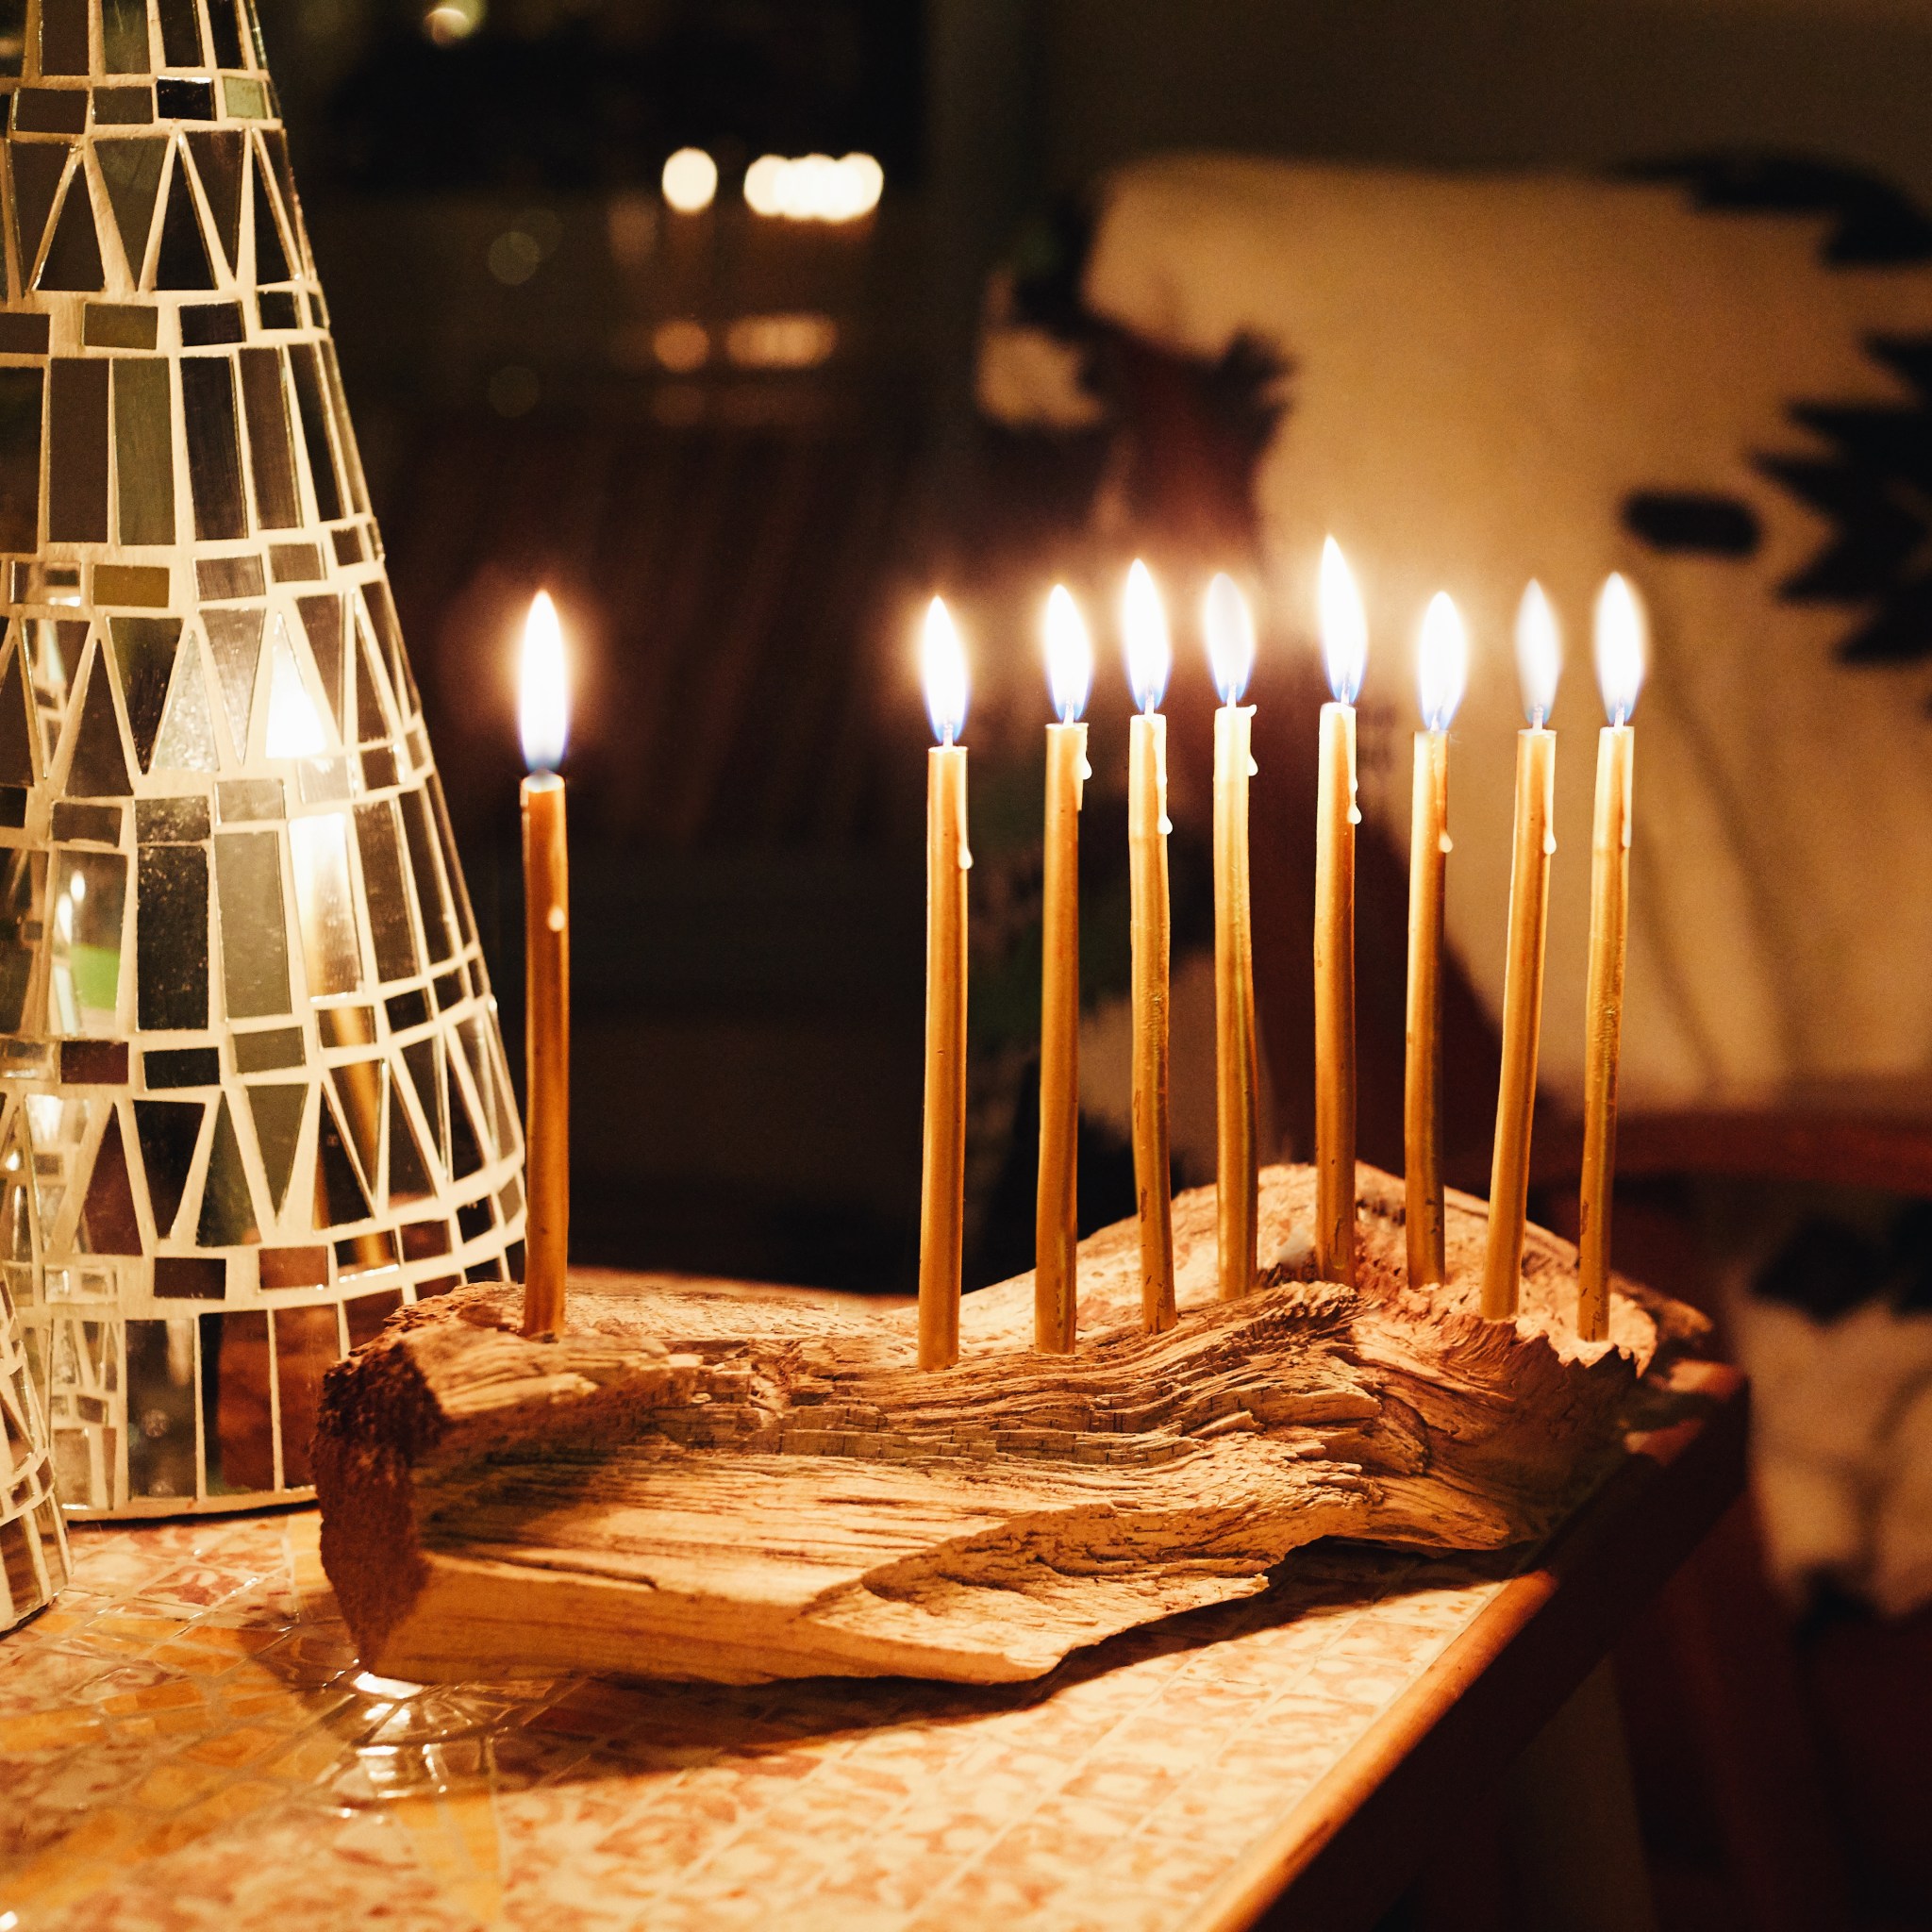 How to: Make your own menorah